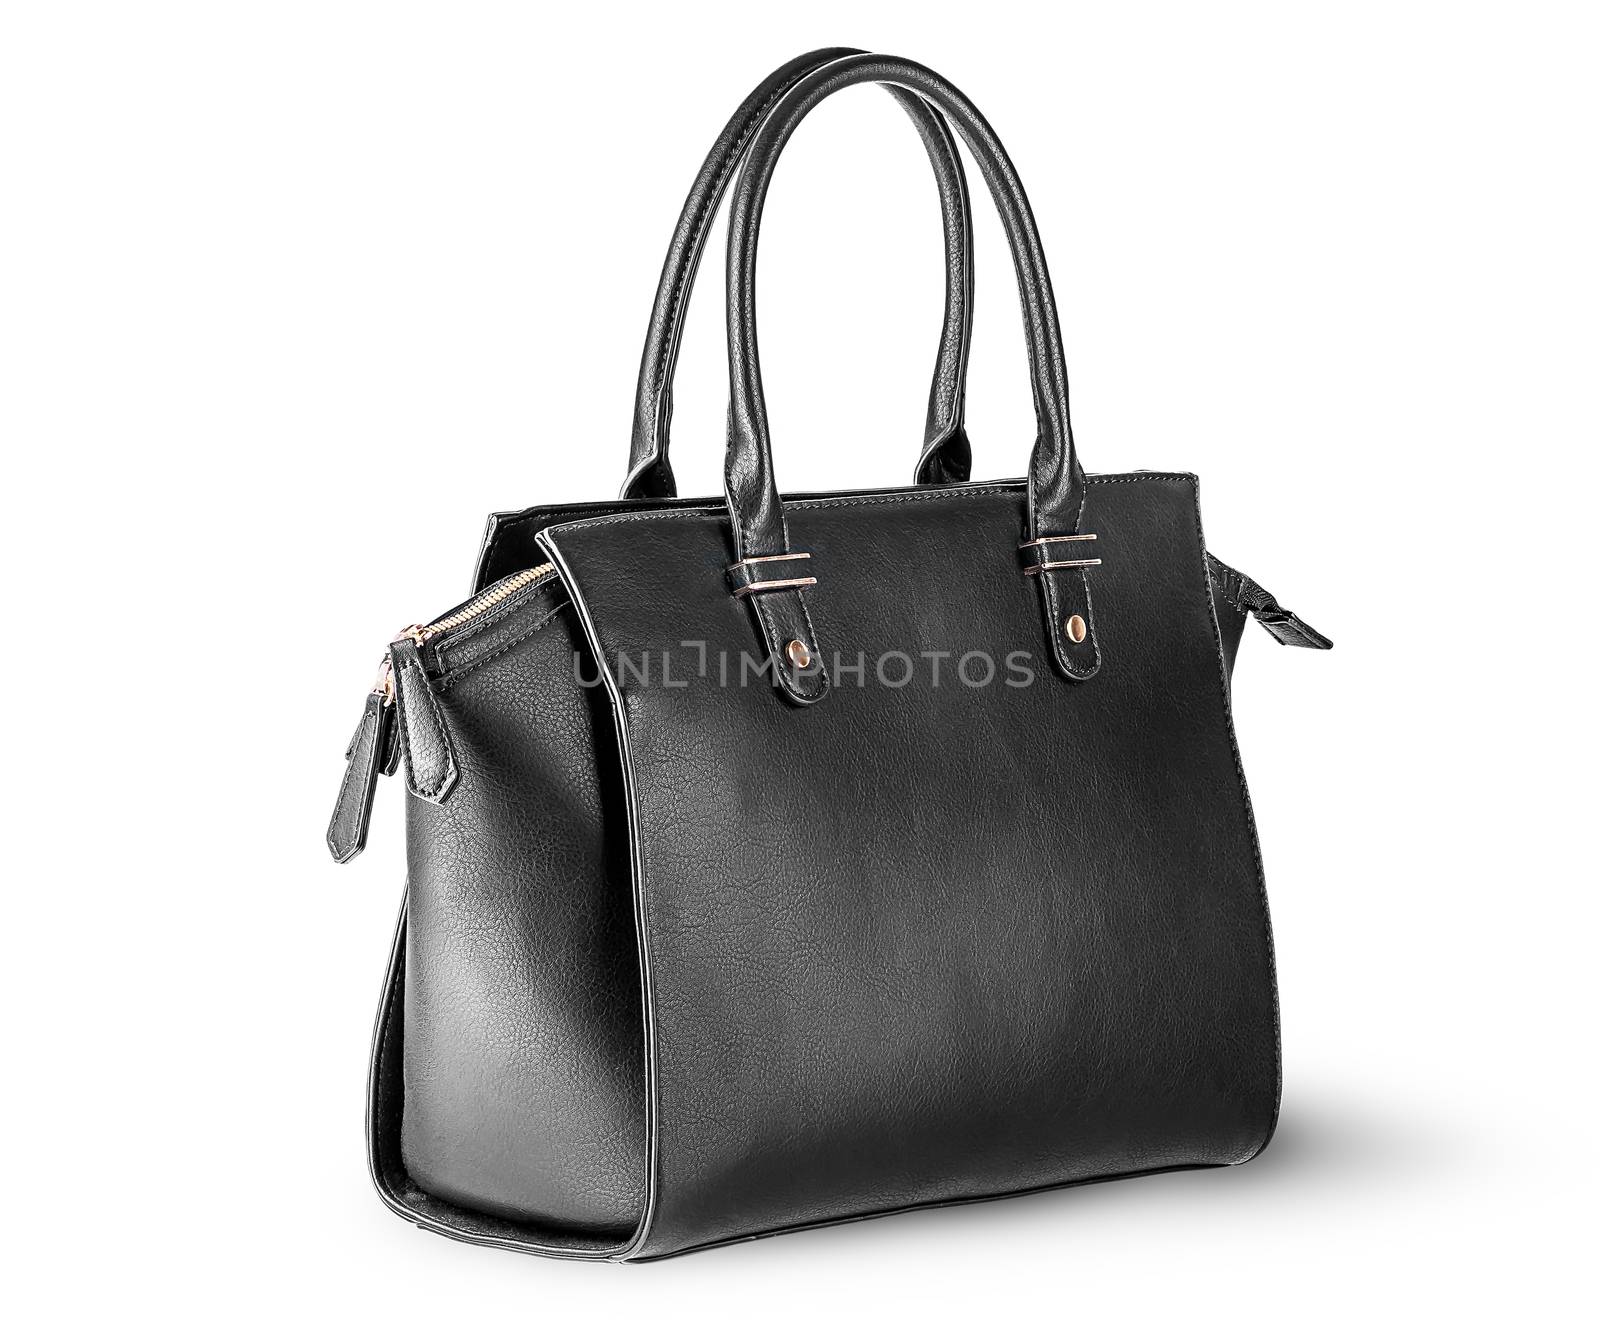 Ladies black leather bag rotated isolated on white background